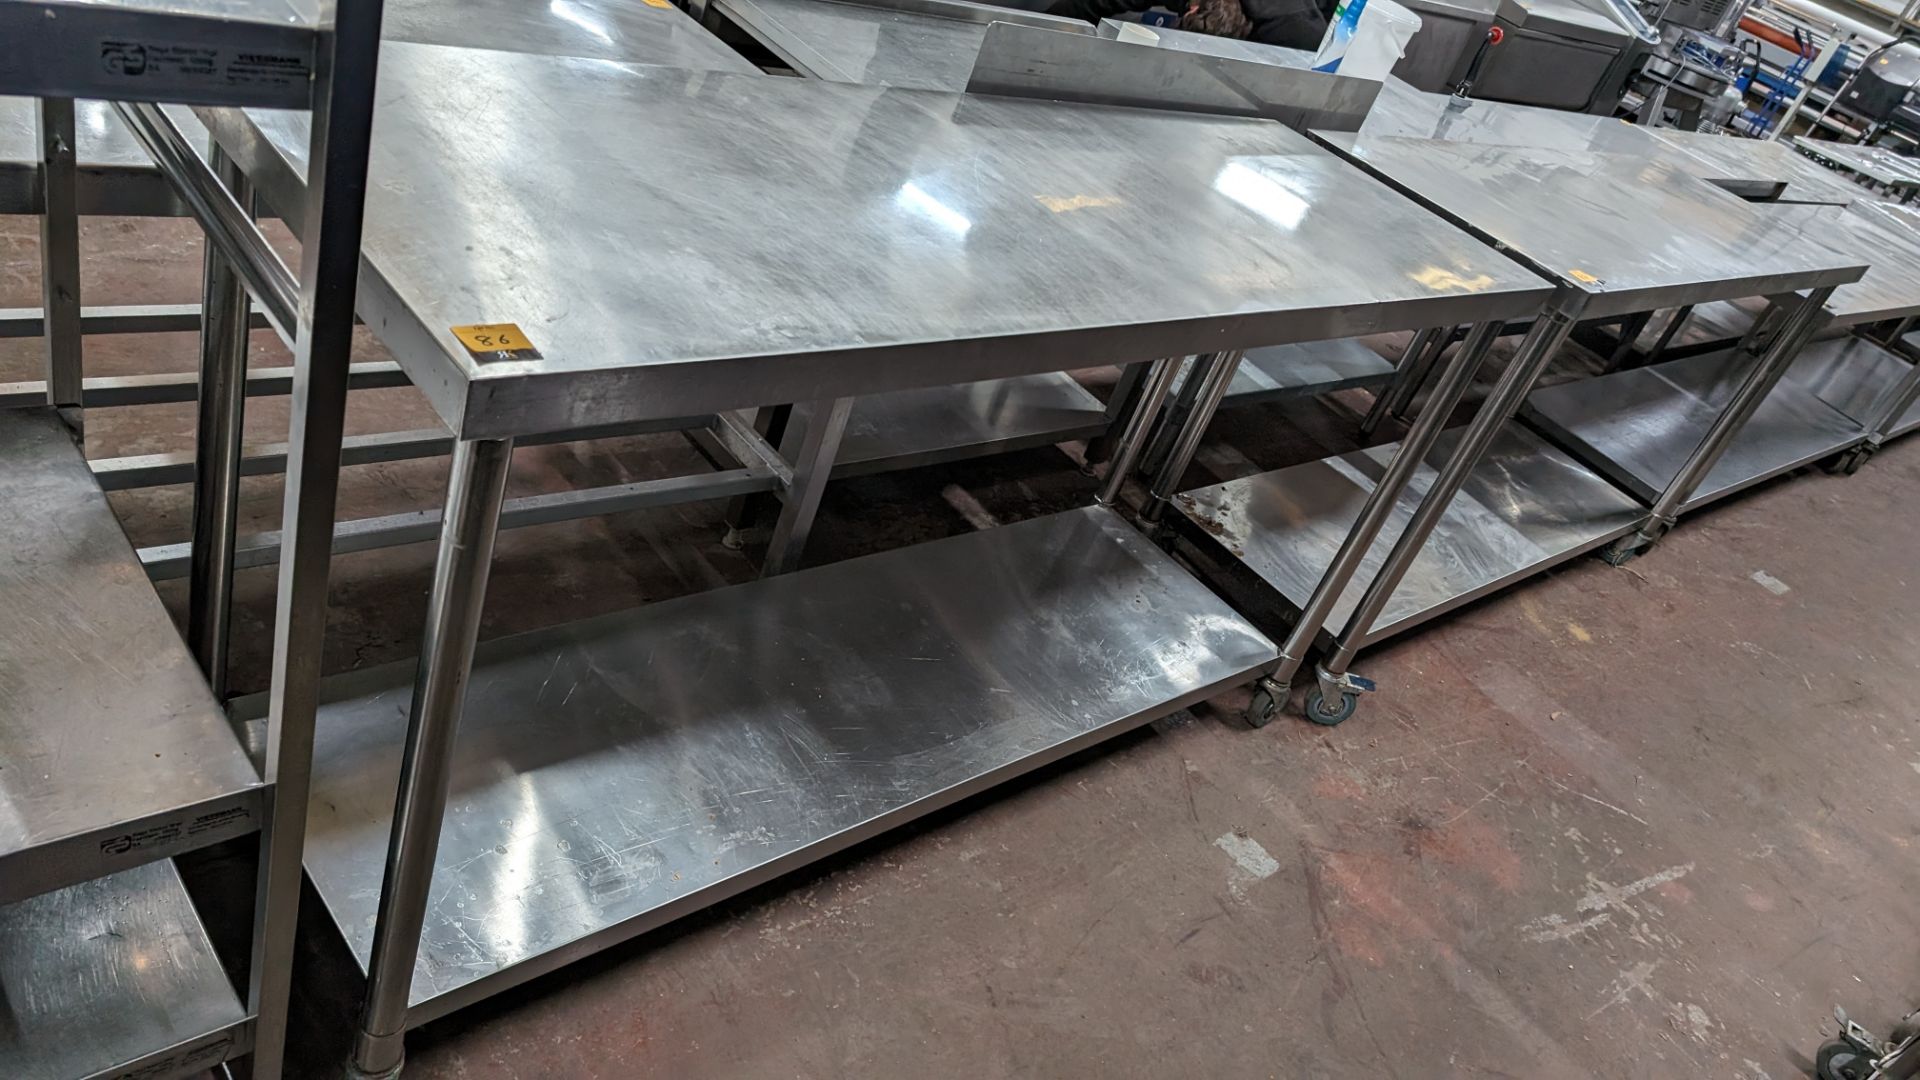 Stainless steel large mobile twin tier table, max dimensions 1800 x 600mm x 995mm - Image 3 of 3